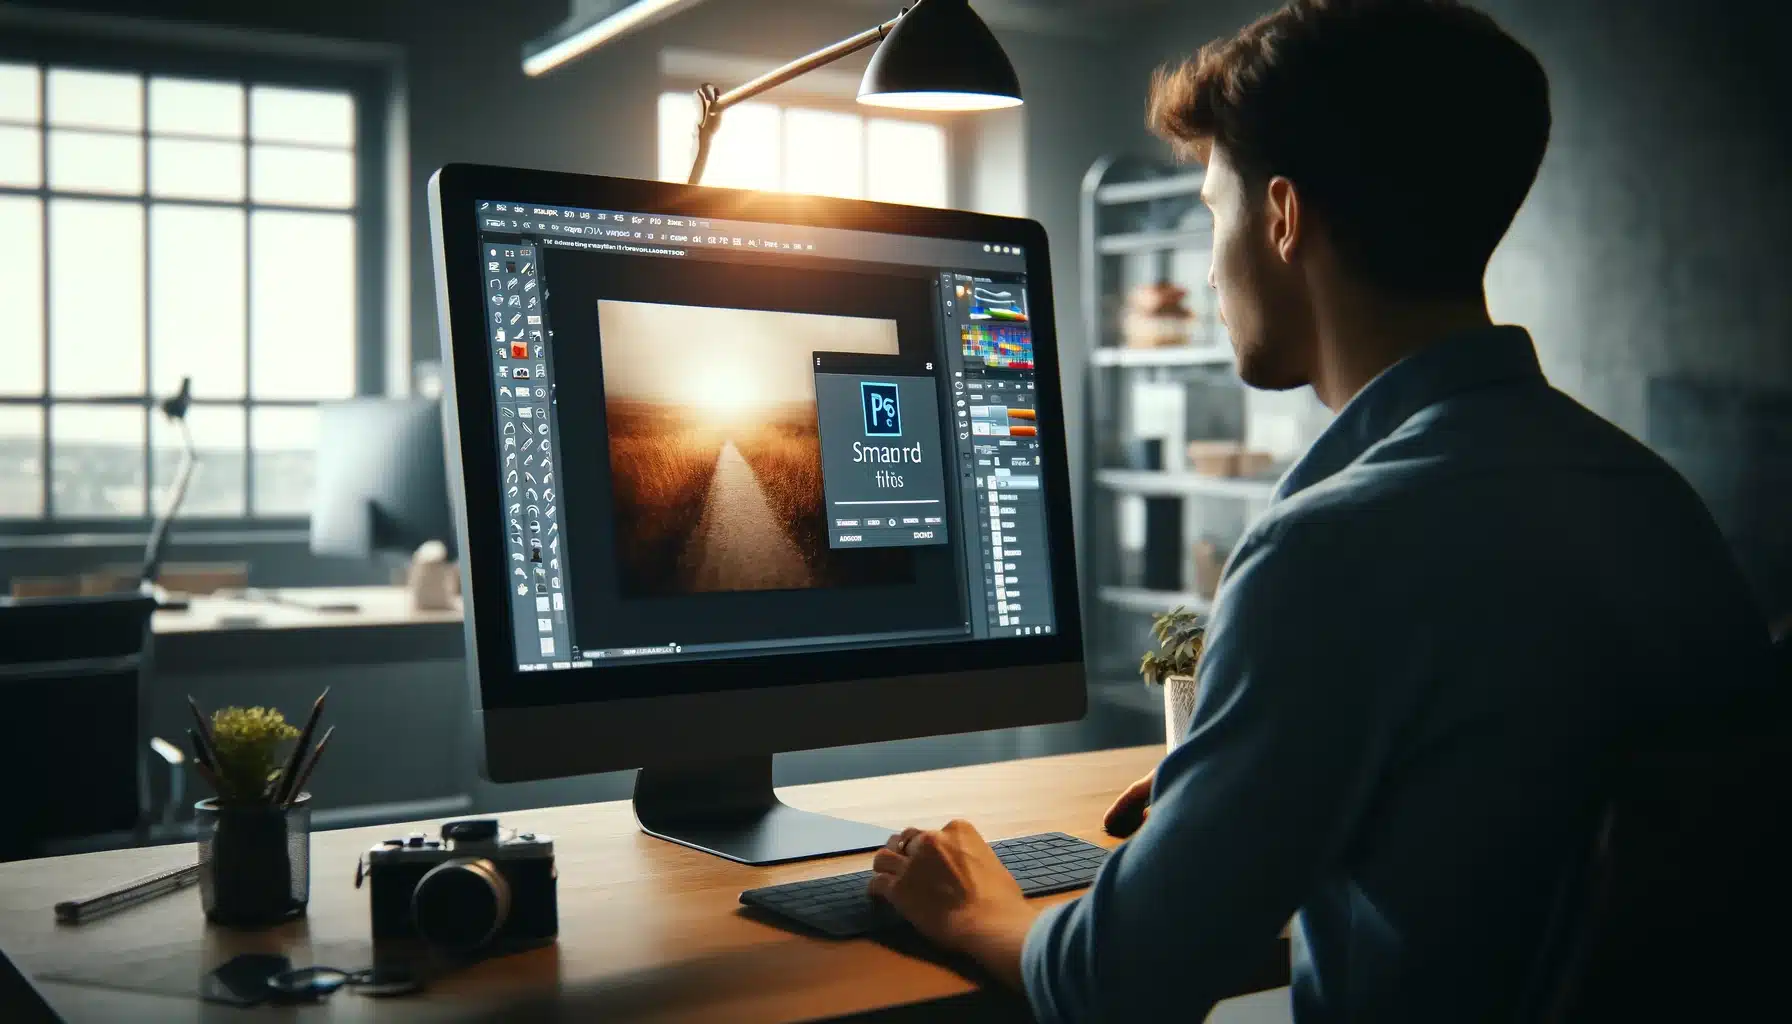 Professional editing a photo using Smart Filters in Photoshop on a desktop computer in an office setting.